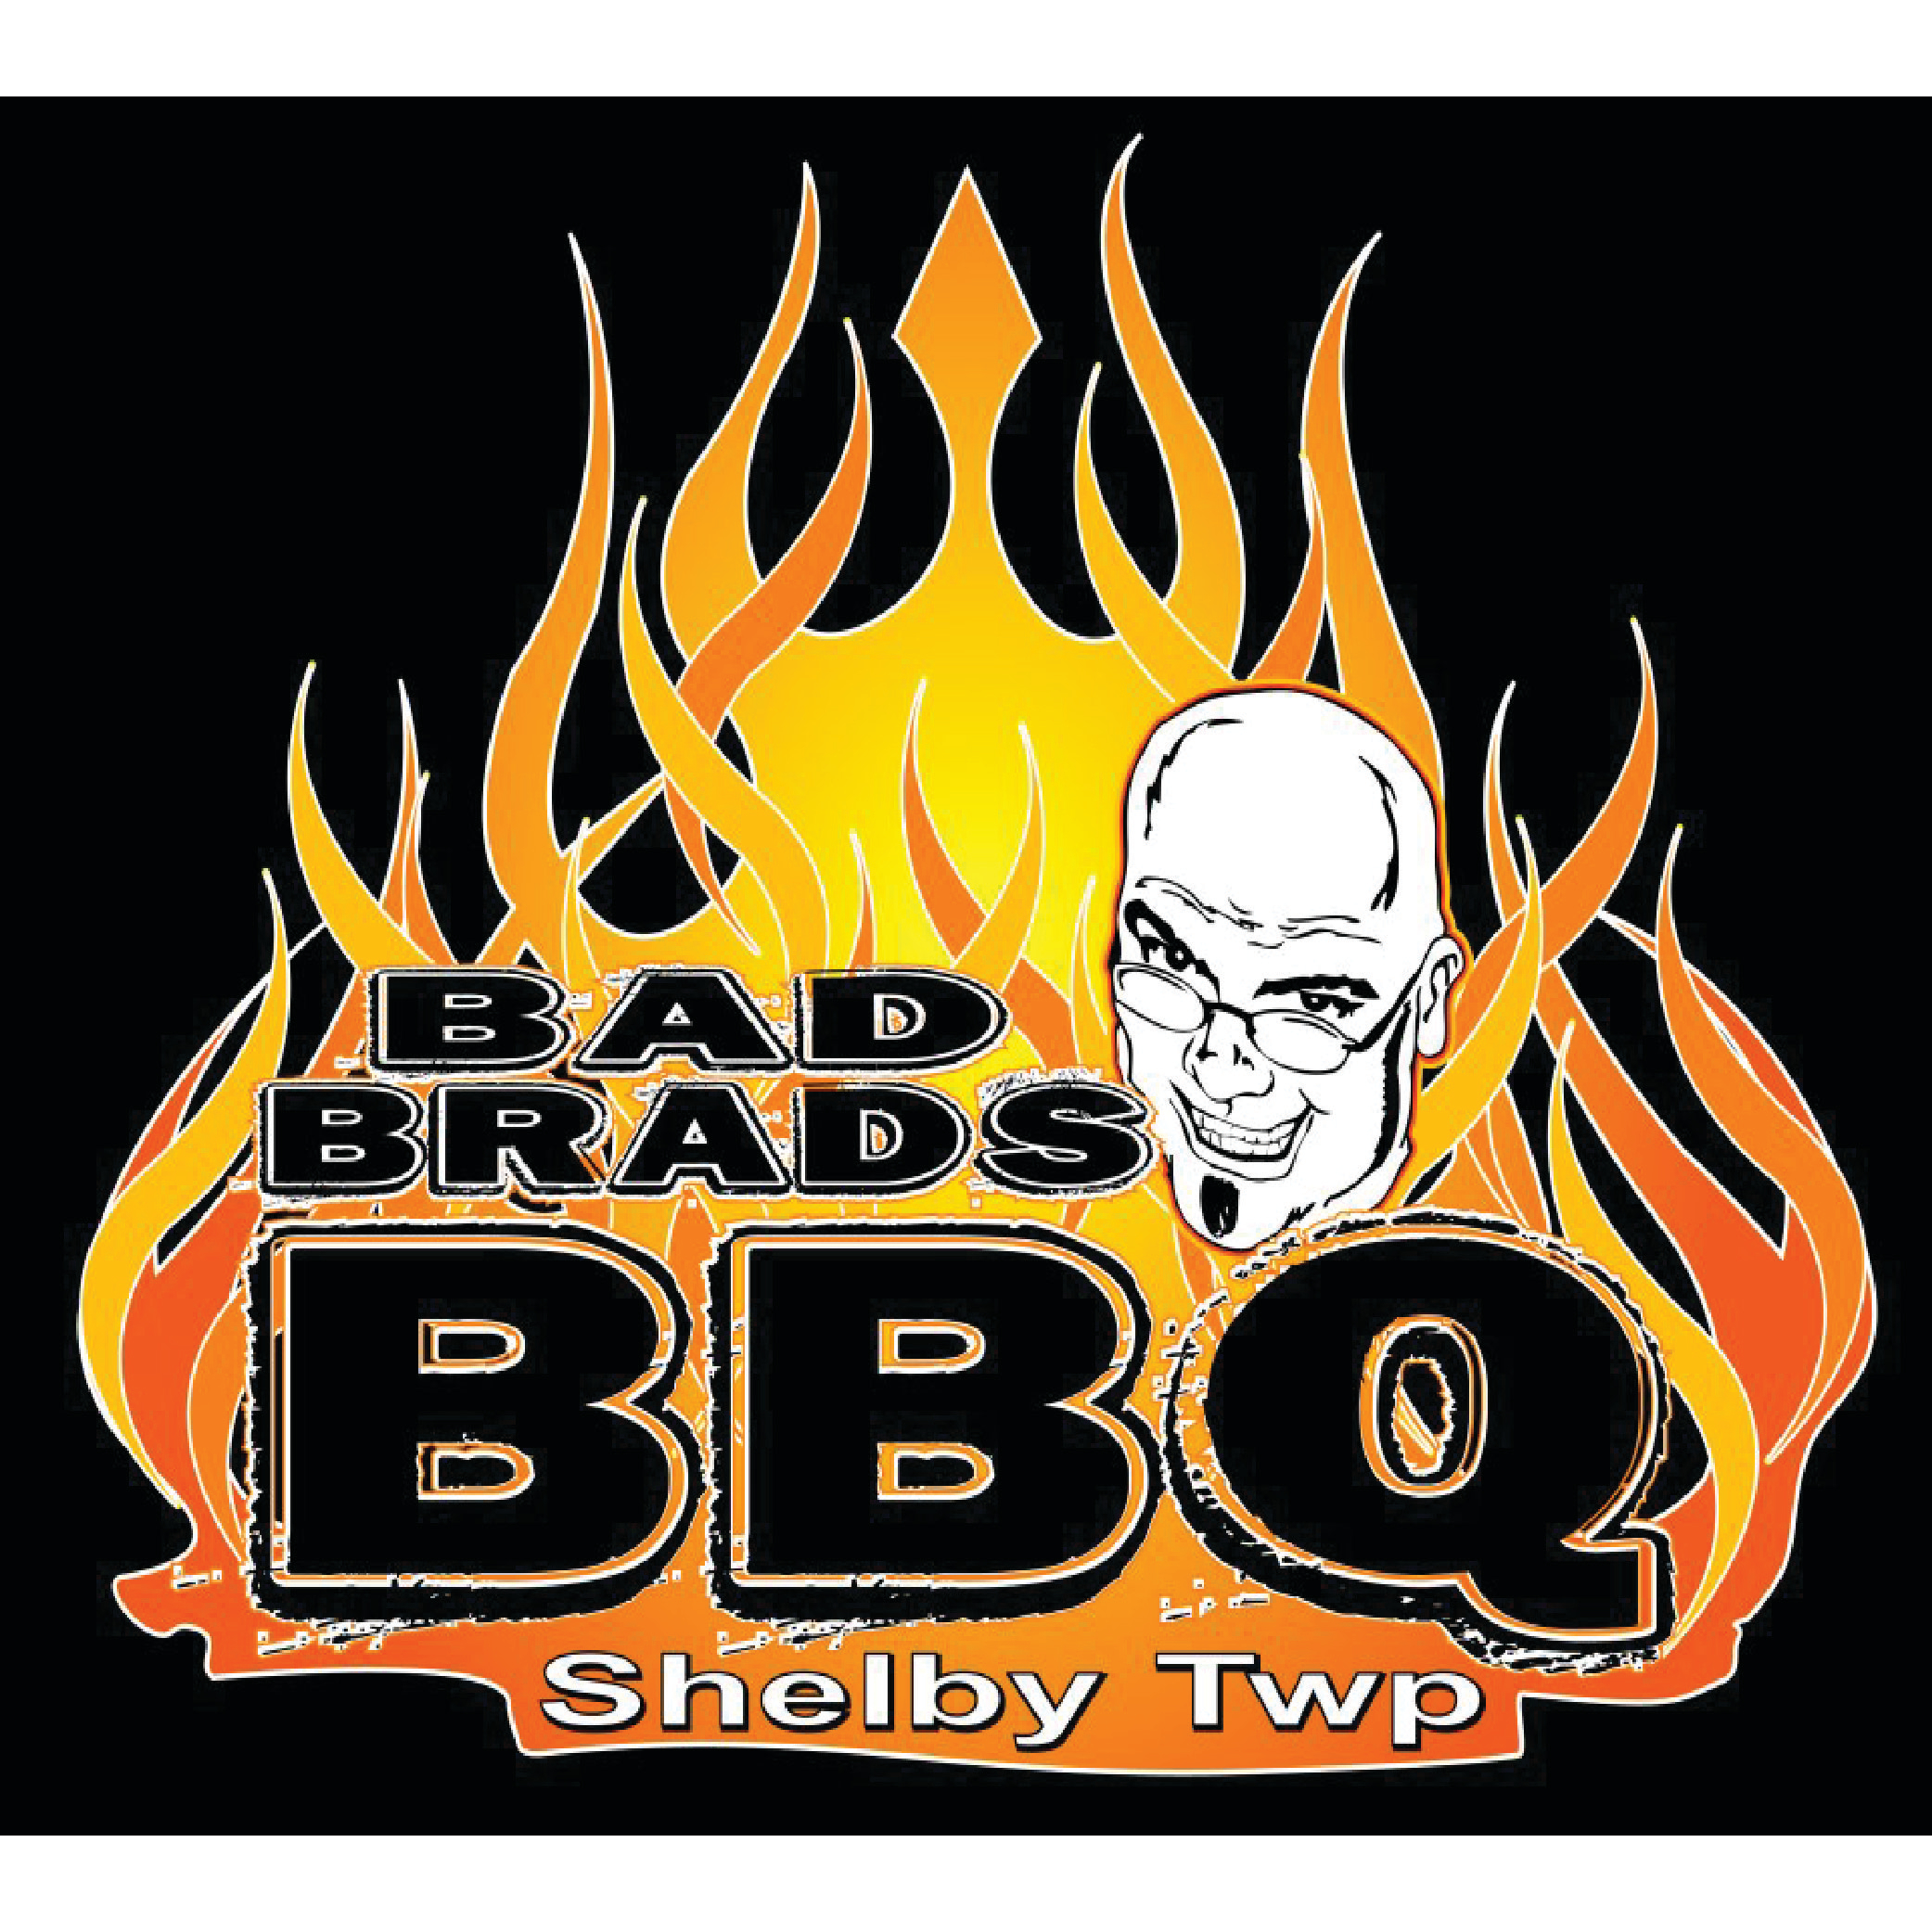 Bad Brads BBQ, 6525 23 Mile Rd, Shelby Township, MI, Barbecue MapQuest